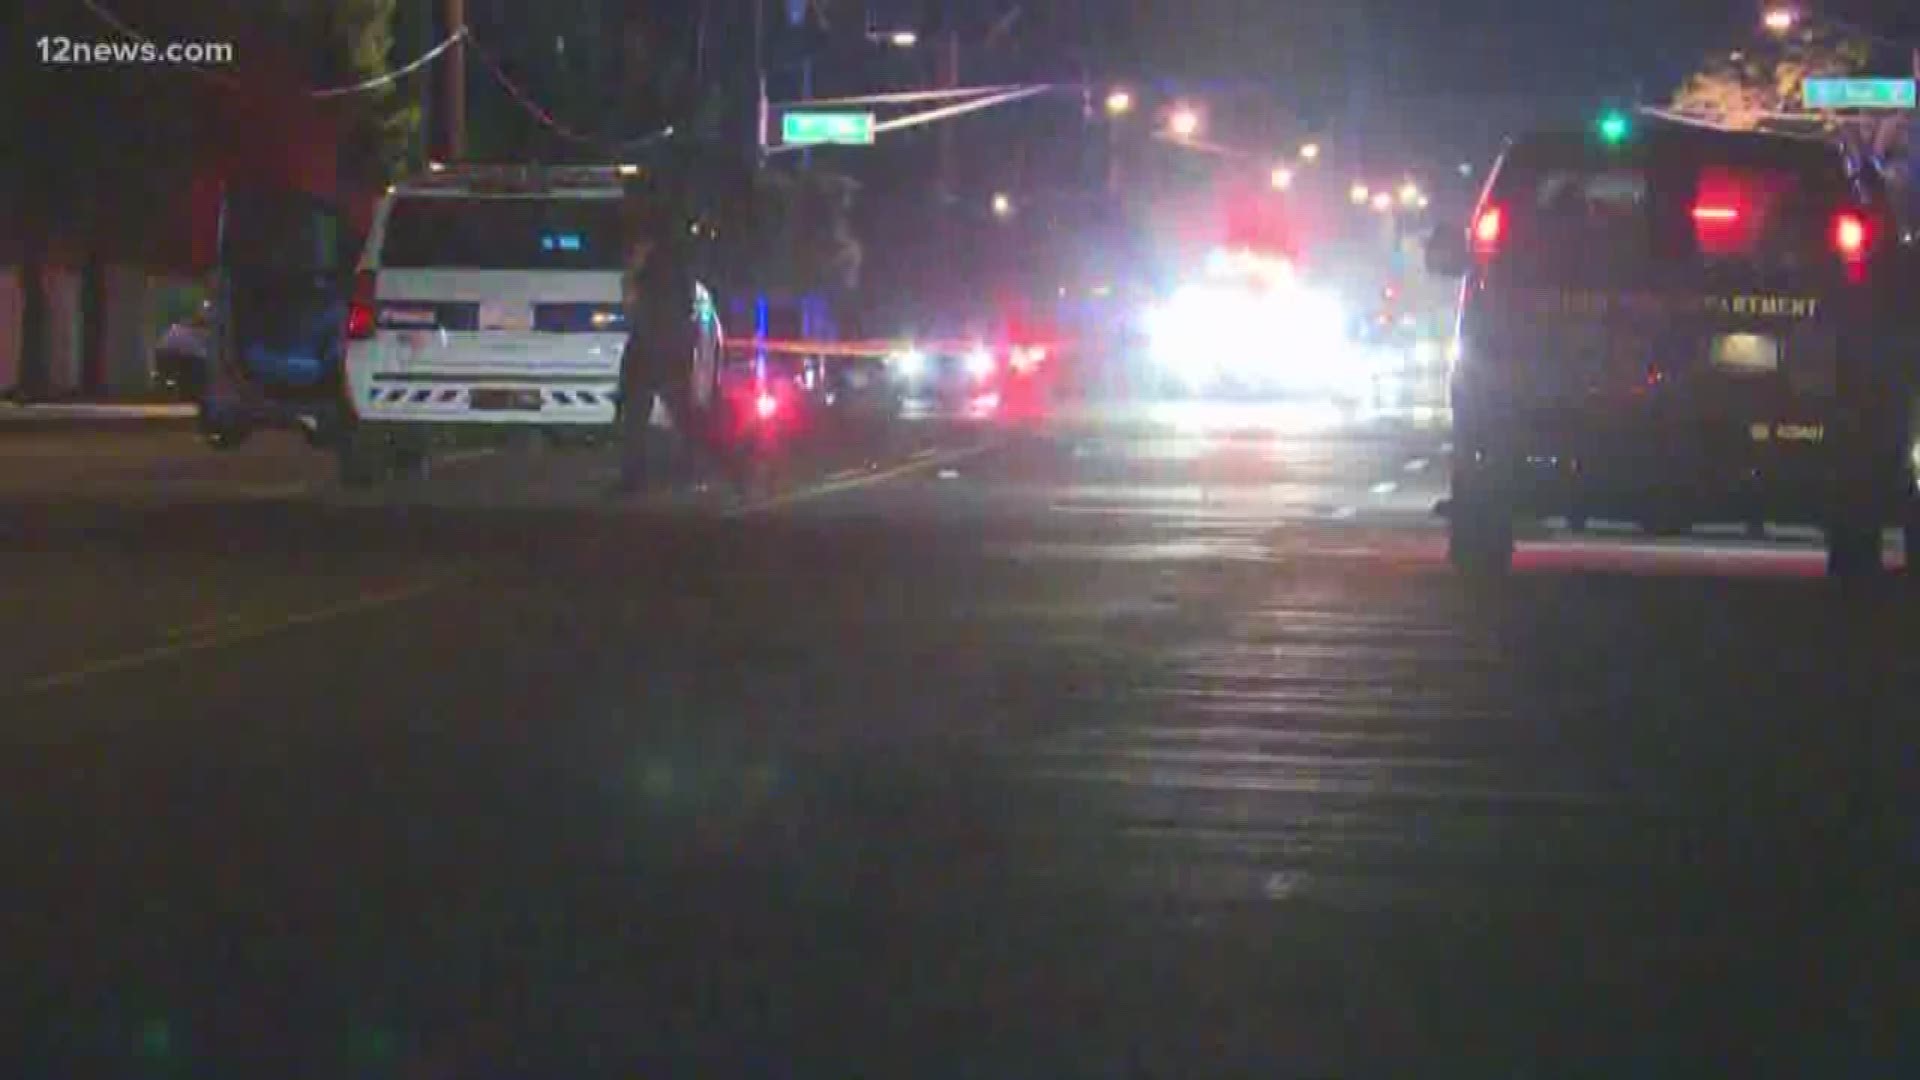 A driver has died after colliding with a garbage truck, a mayoral candidate administered CPR to a crash victim, a Tempe man attacks a driver with scissors and a teen is in stable condition after being hit by a car while on his bike.